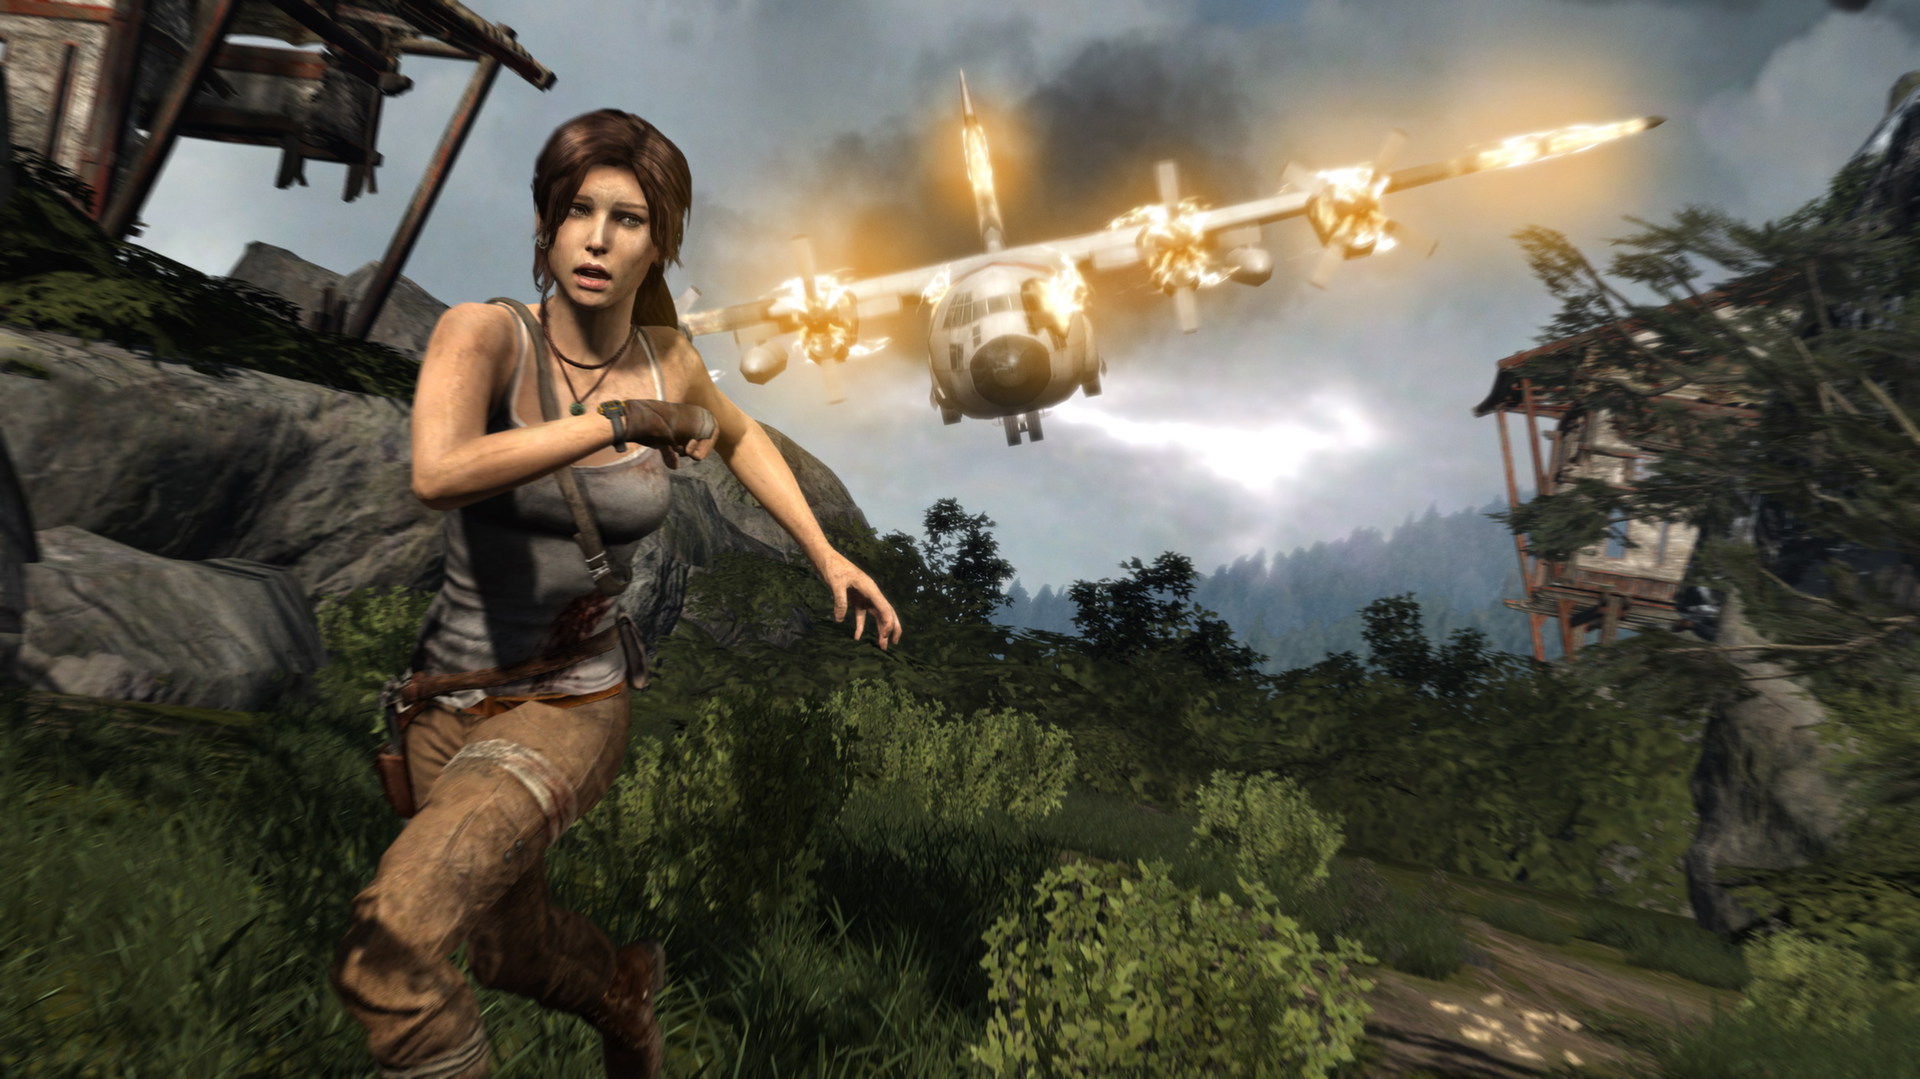 Tomb Raider Square Enix announces next game in the series Den of Geek